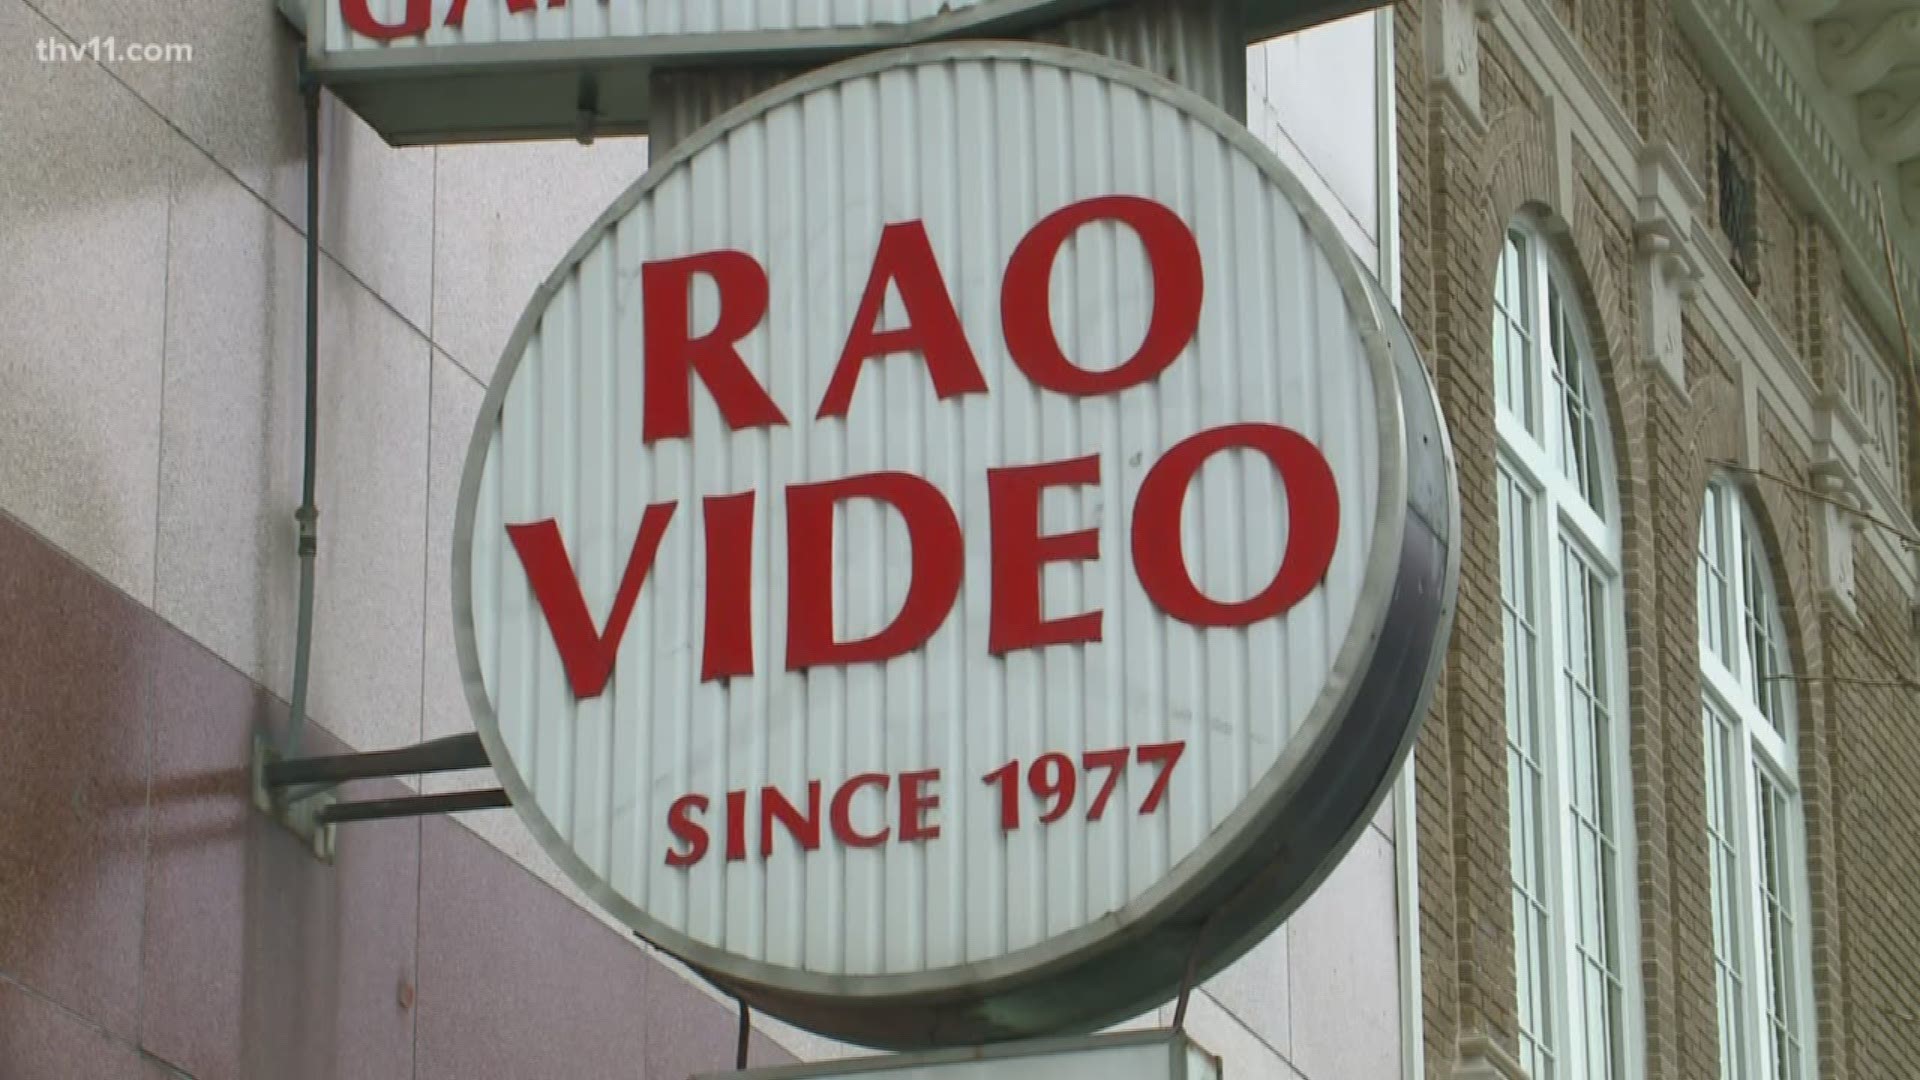 In Little Rock, a video store staple downtown is closing after more than 40 years.